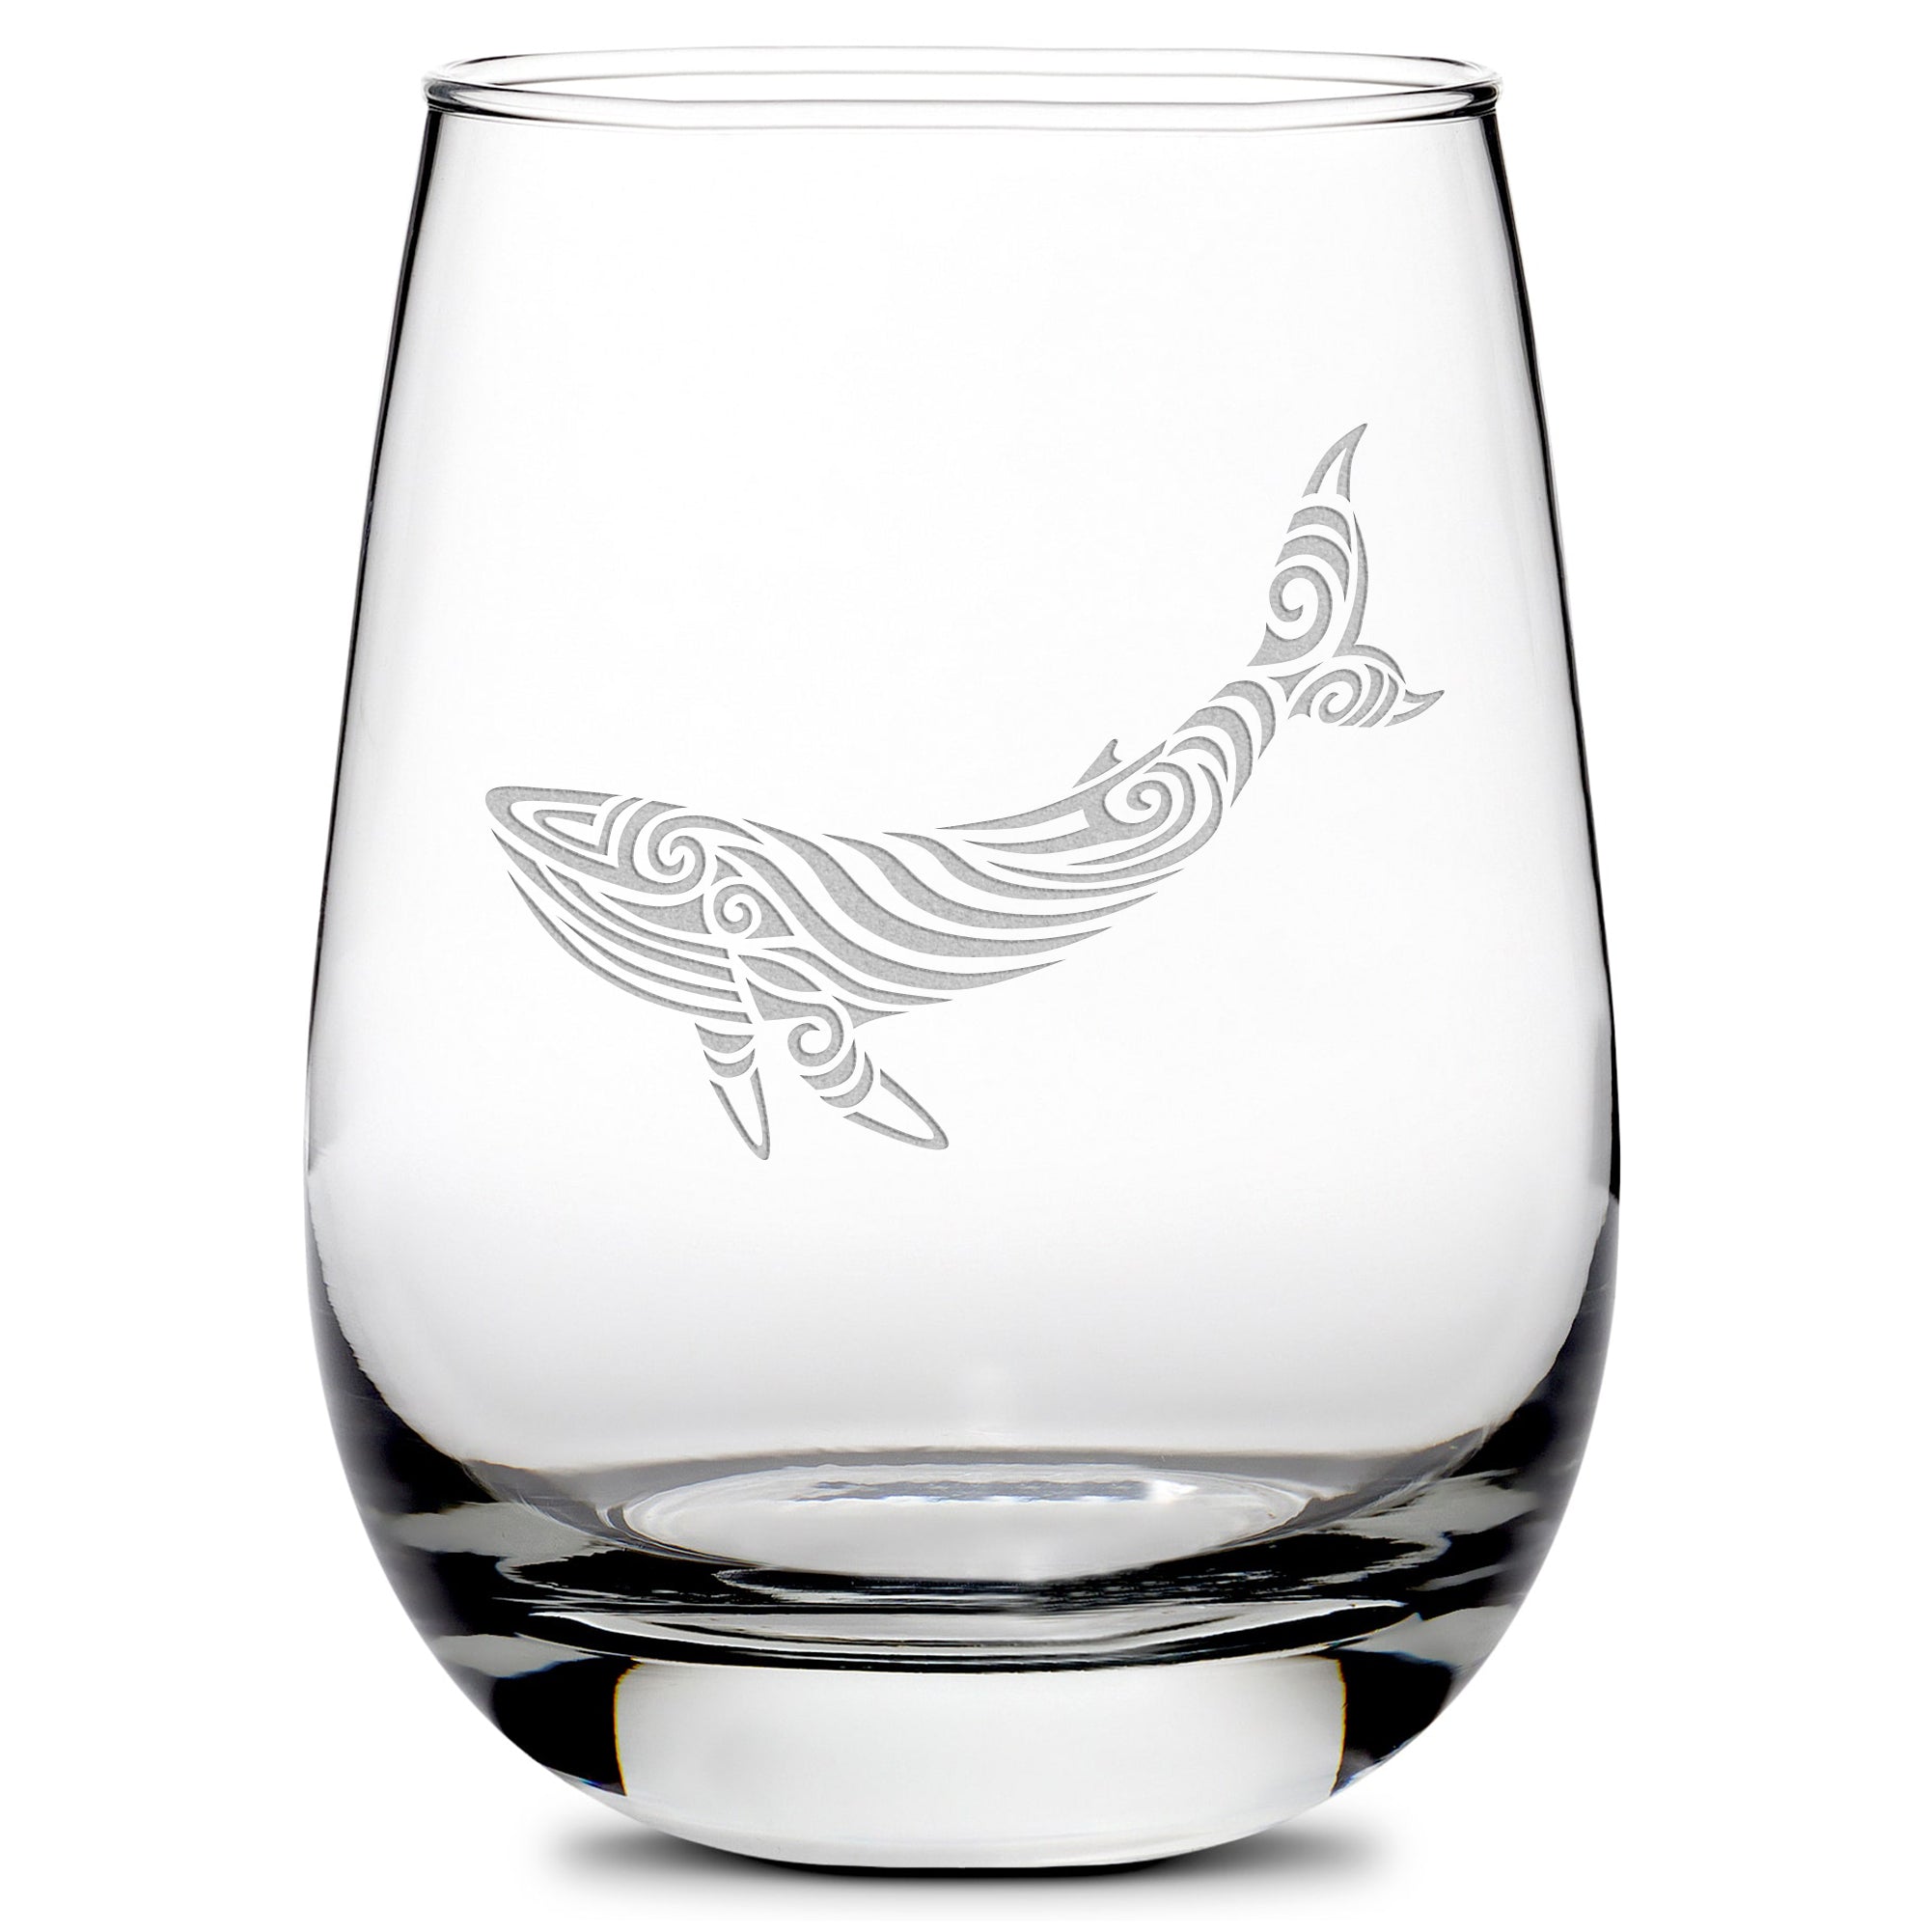 Premium Wine Glass, Whale Design, 16oz, Laser Etched or Hand Etched